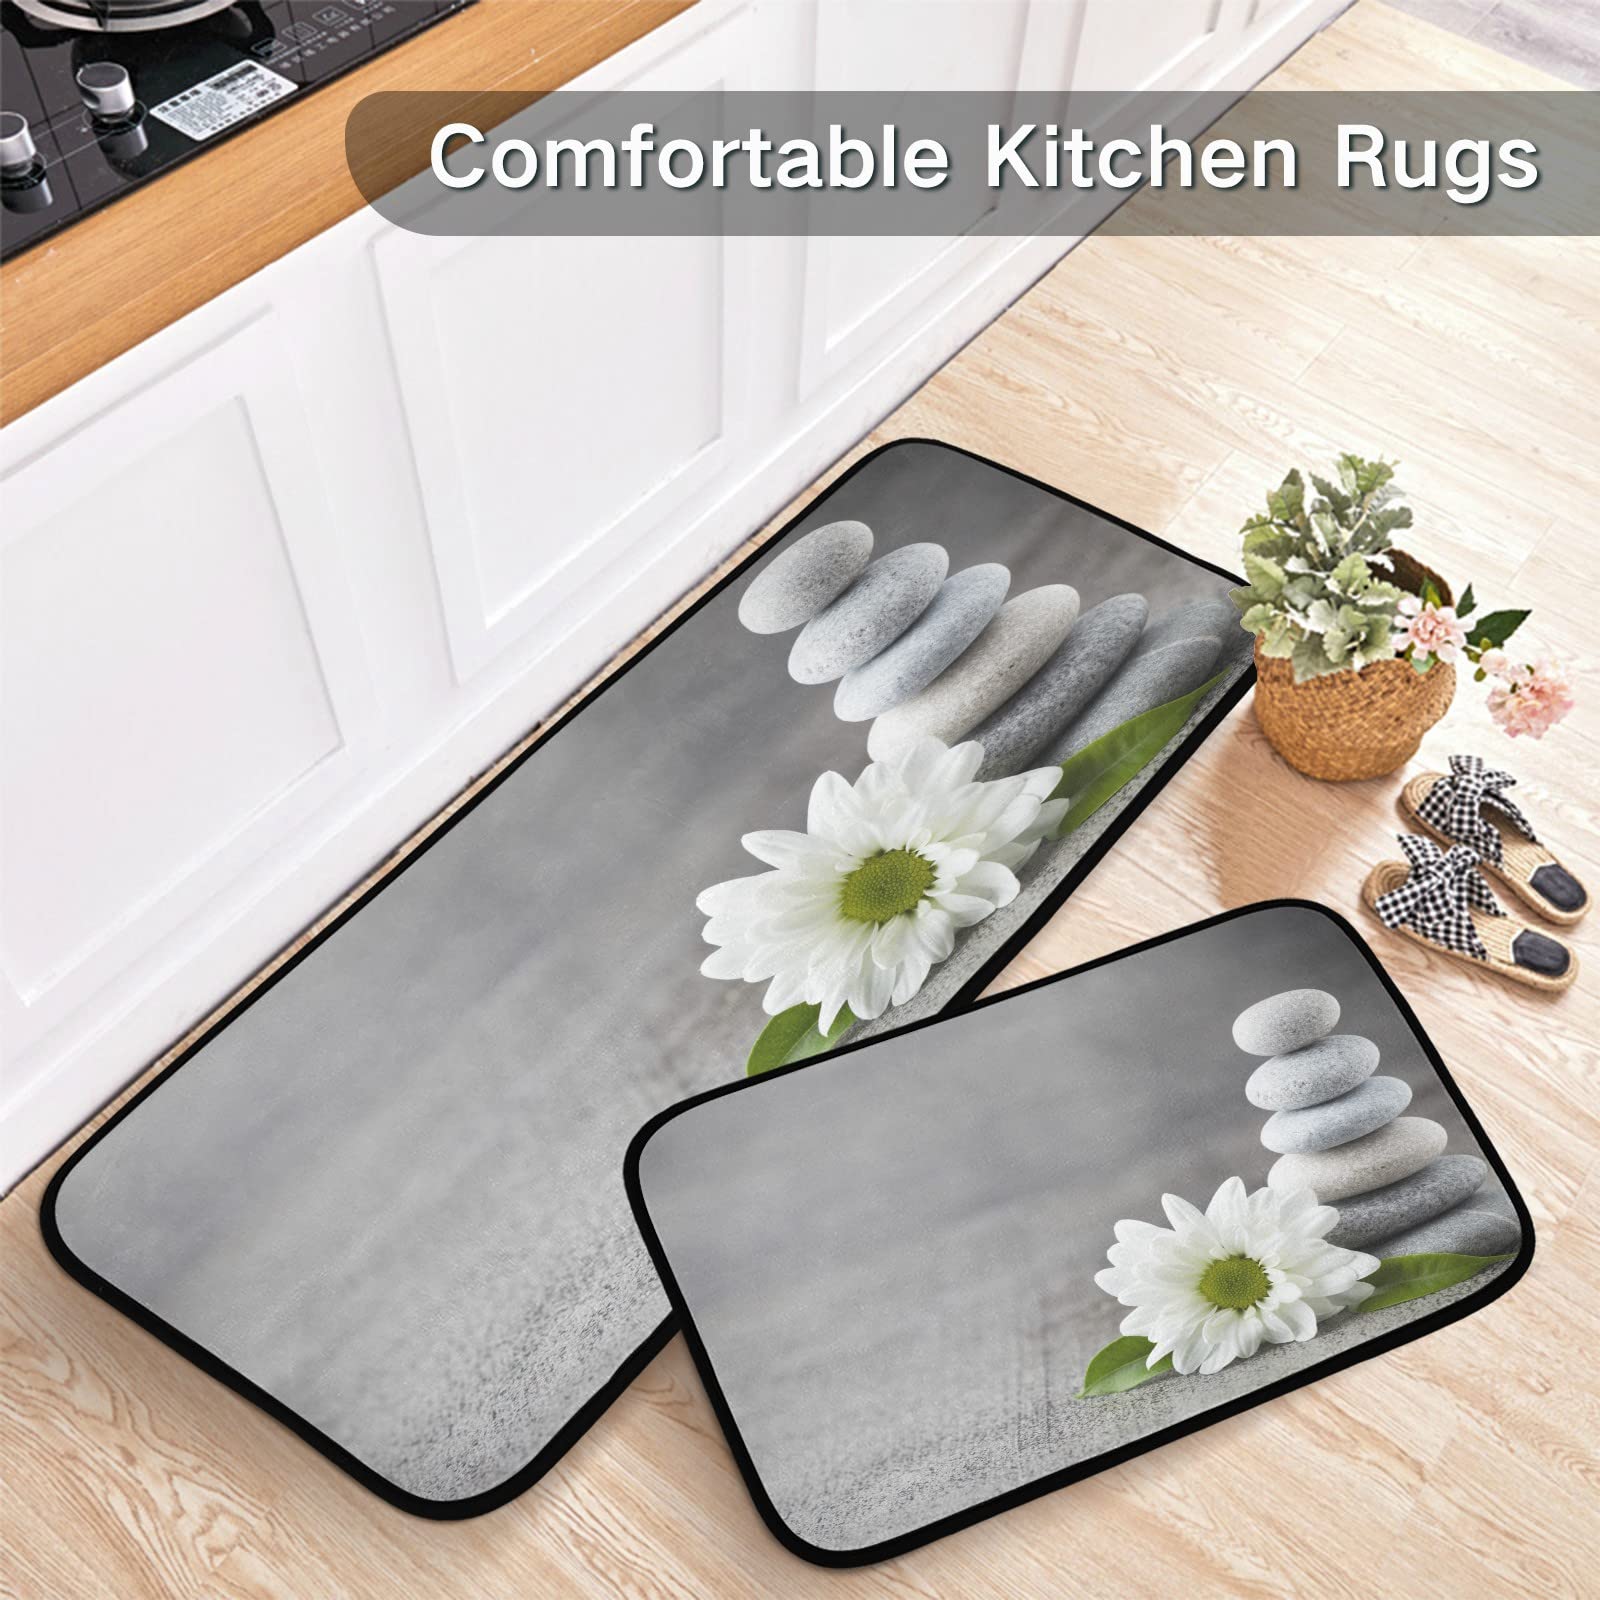 Zen Concepts Kitchen Mat Set of 2 Anti-Fatigue Kitchen Rug Set Non Slip Foam Cushioned Kitchen Runner Rugs and Mats Comfort Standing Mat for Office Laundry Home Decor